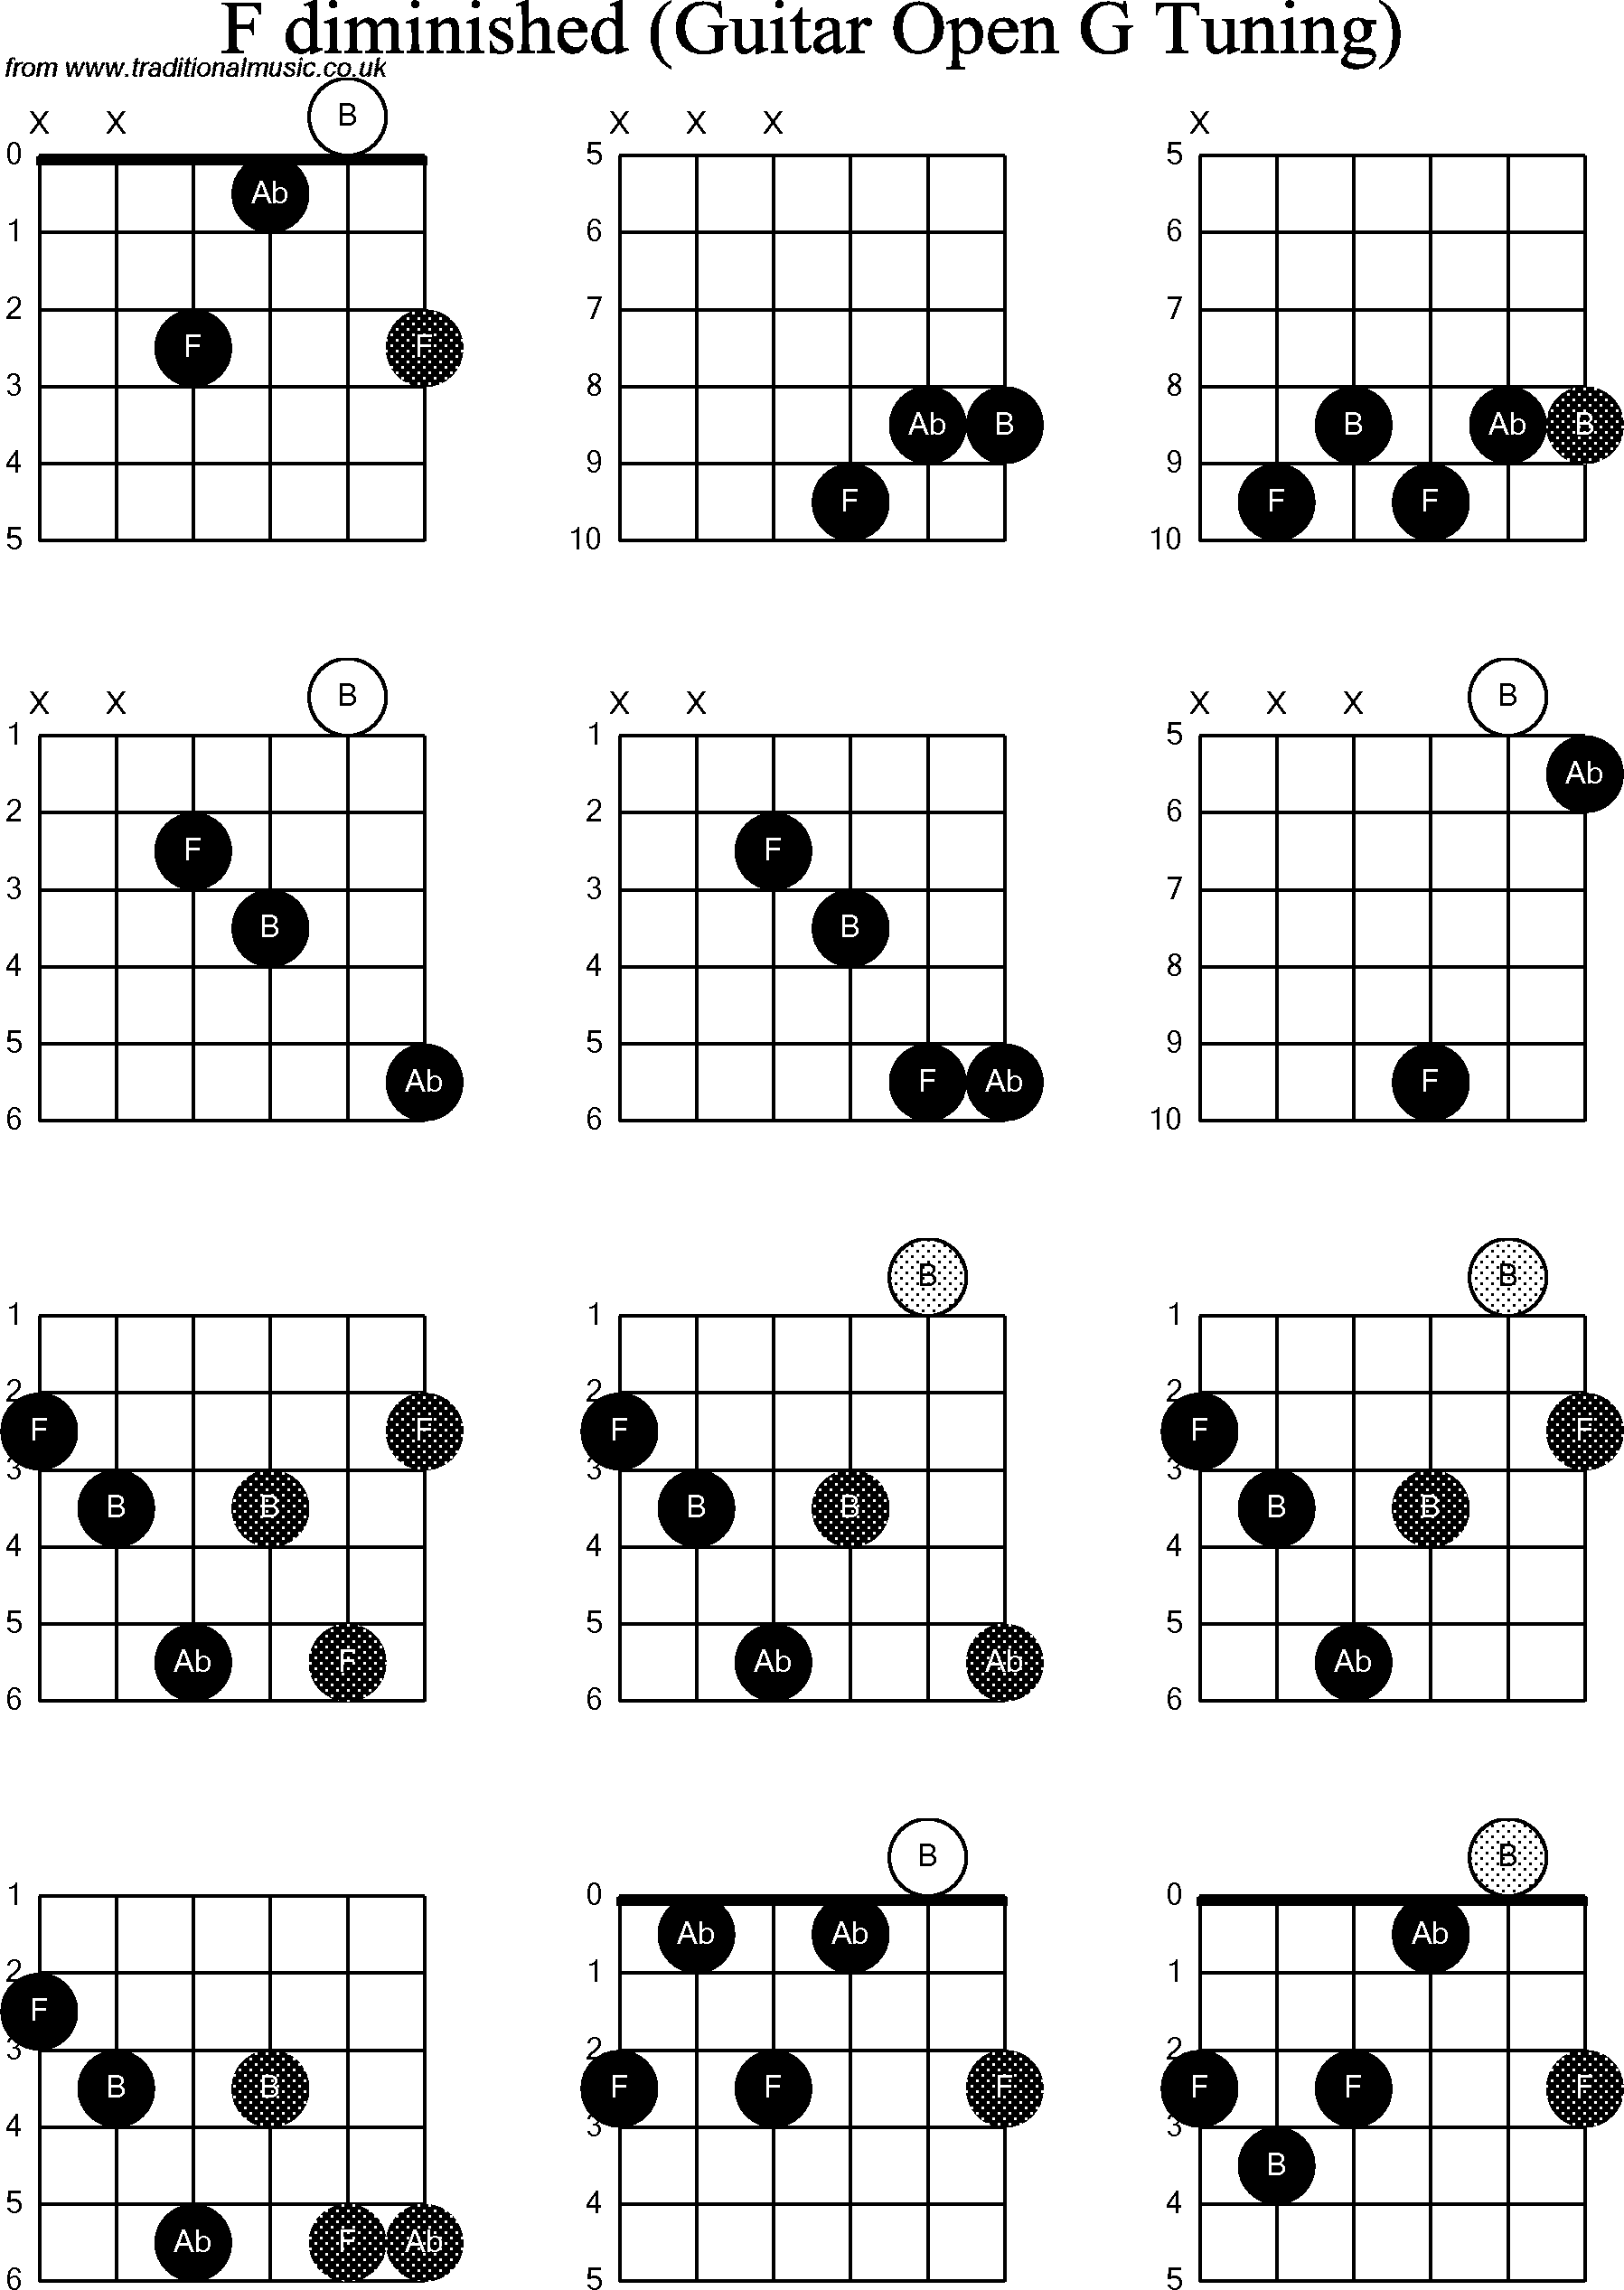 Chord diagrams for Dobro F Diminished